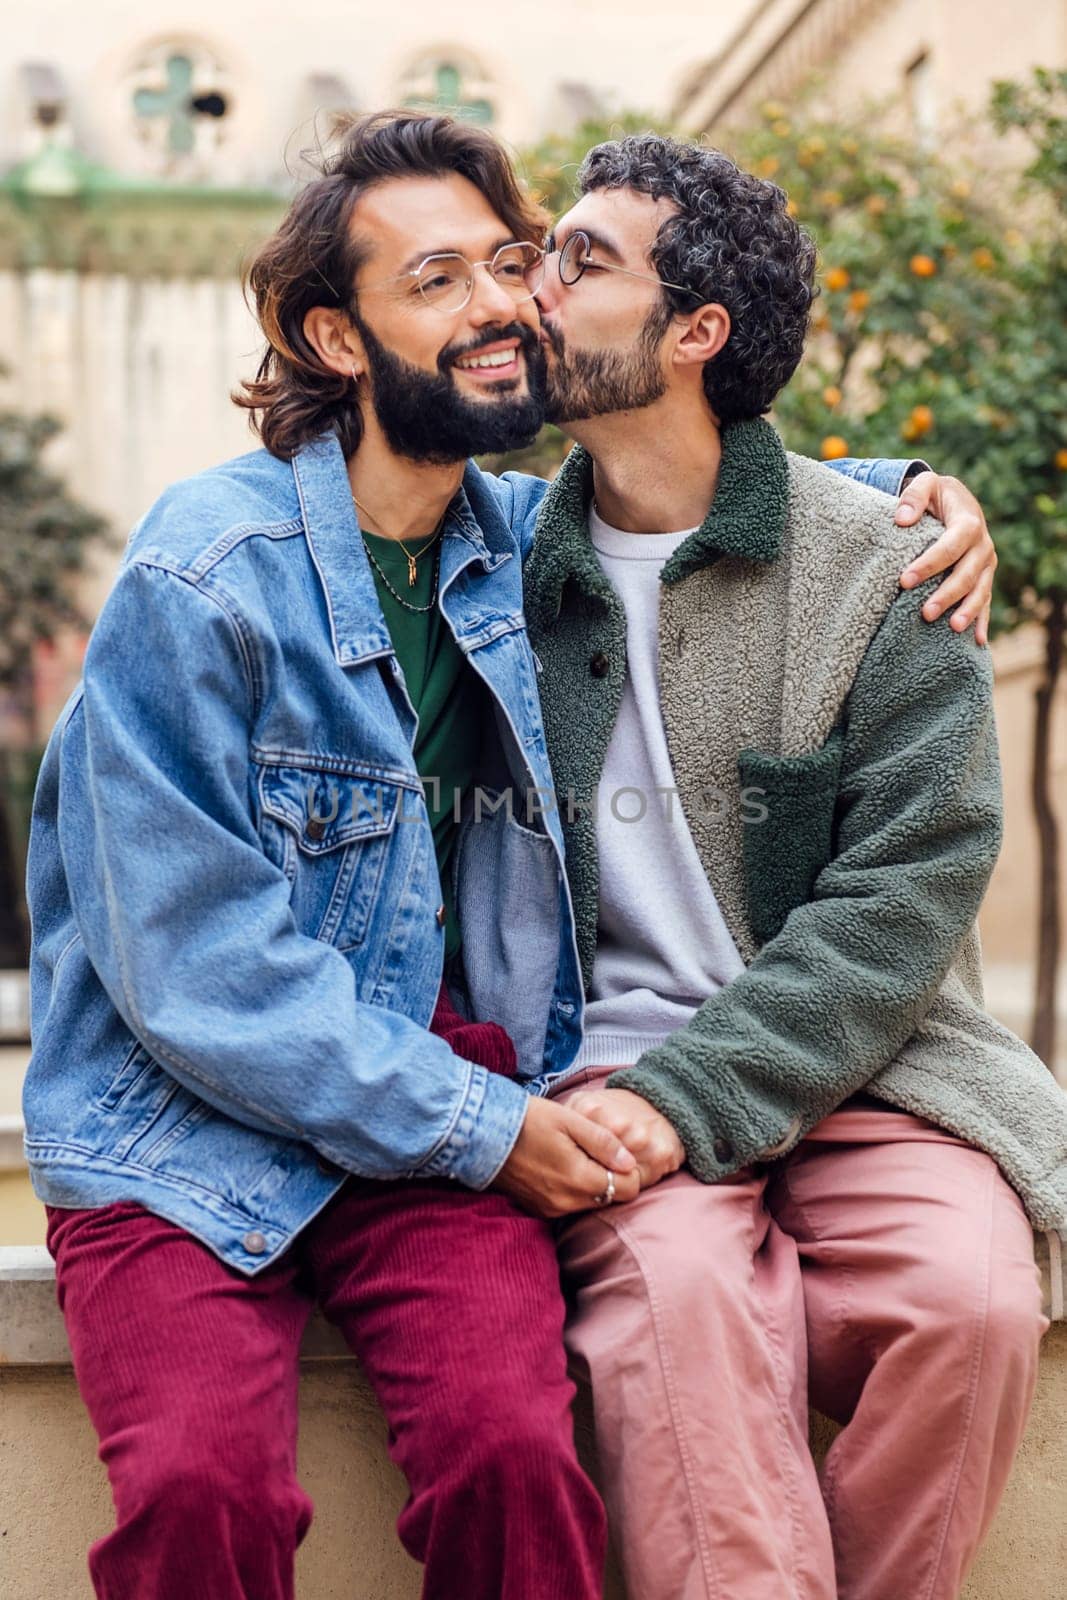 young man kissing tenderly his boyfriend's cheek, concept of urban lifestyle and love between people of the same sex